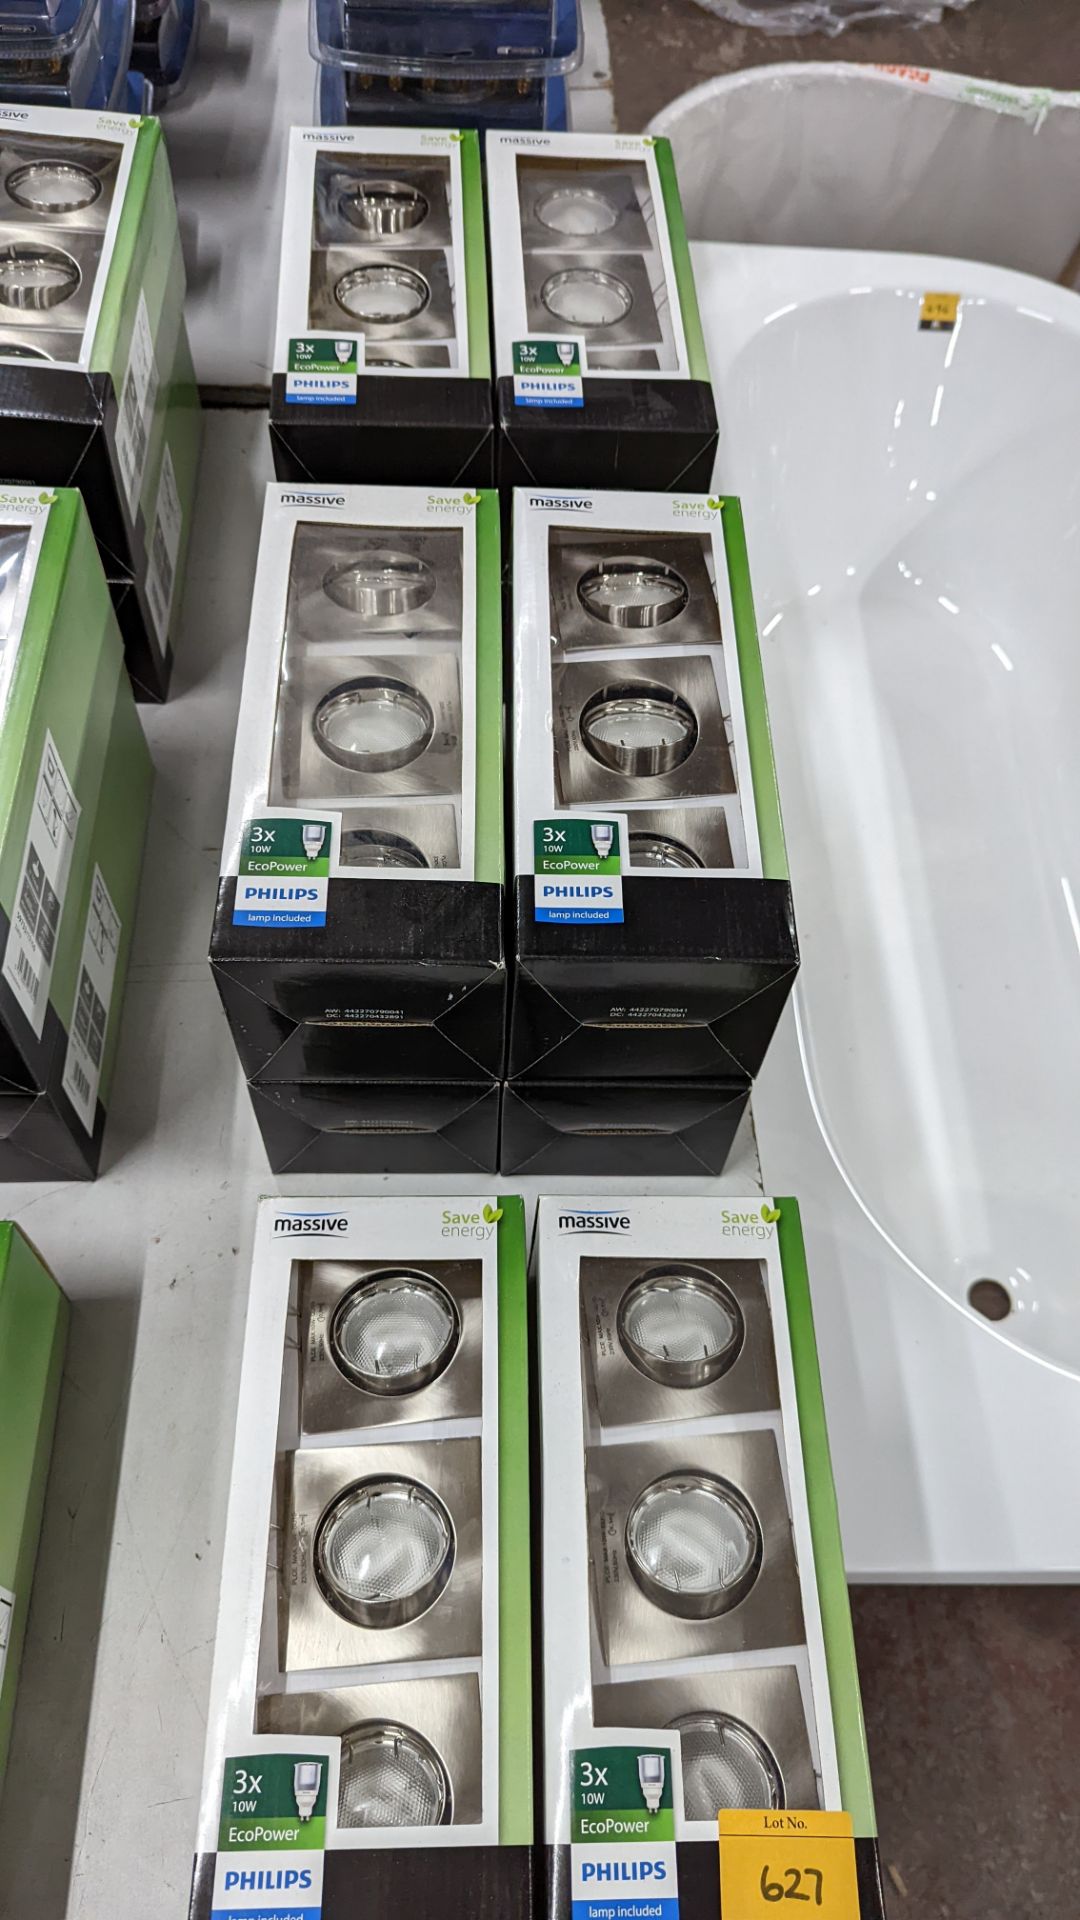 10 off Philips 3x10w Eco Power brushed chrome LED spotlights - this lot consists of 10 boxes which e - Image 2 of 5